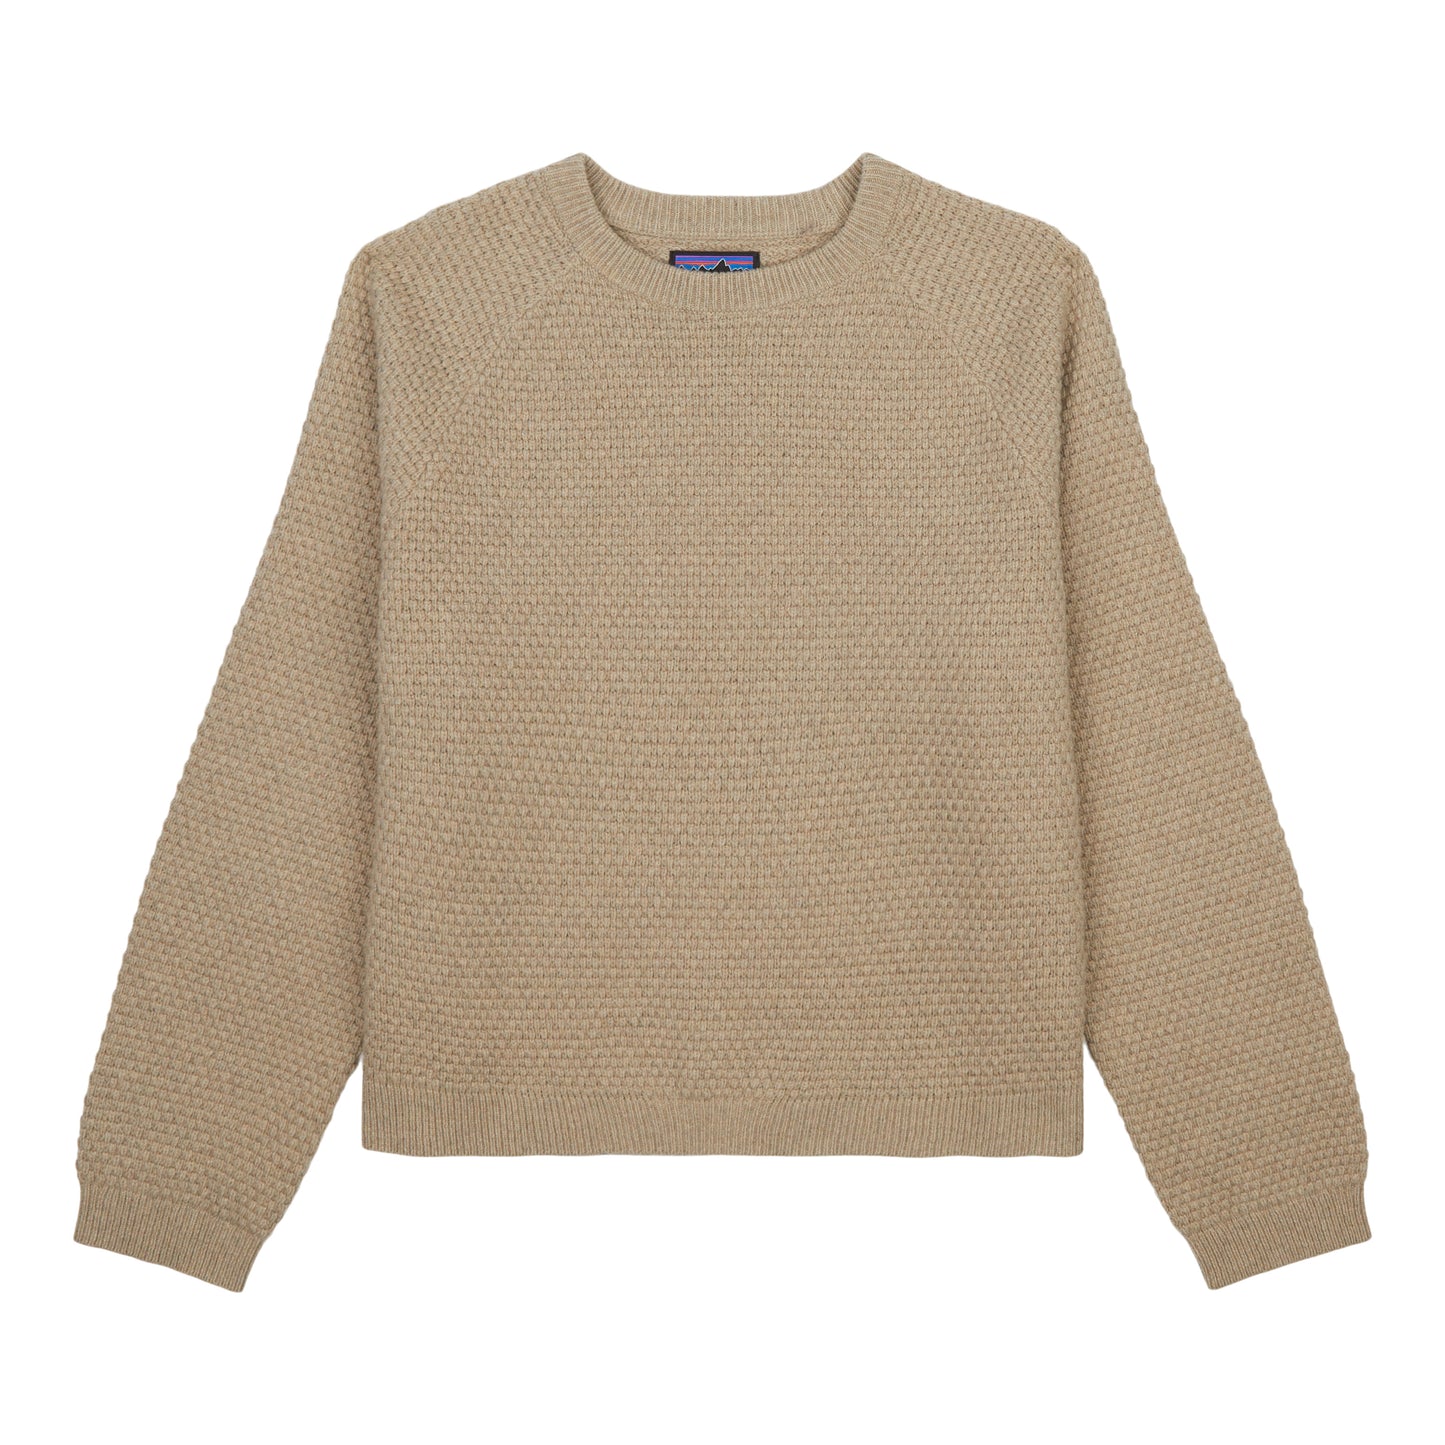 Women's Recycled Cashmere Top